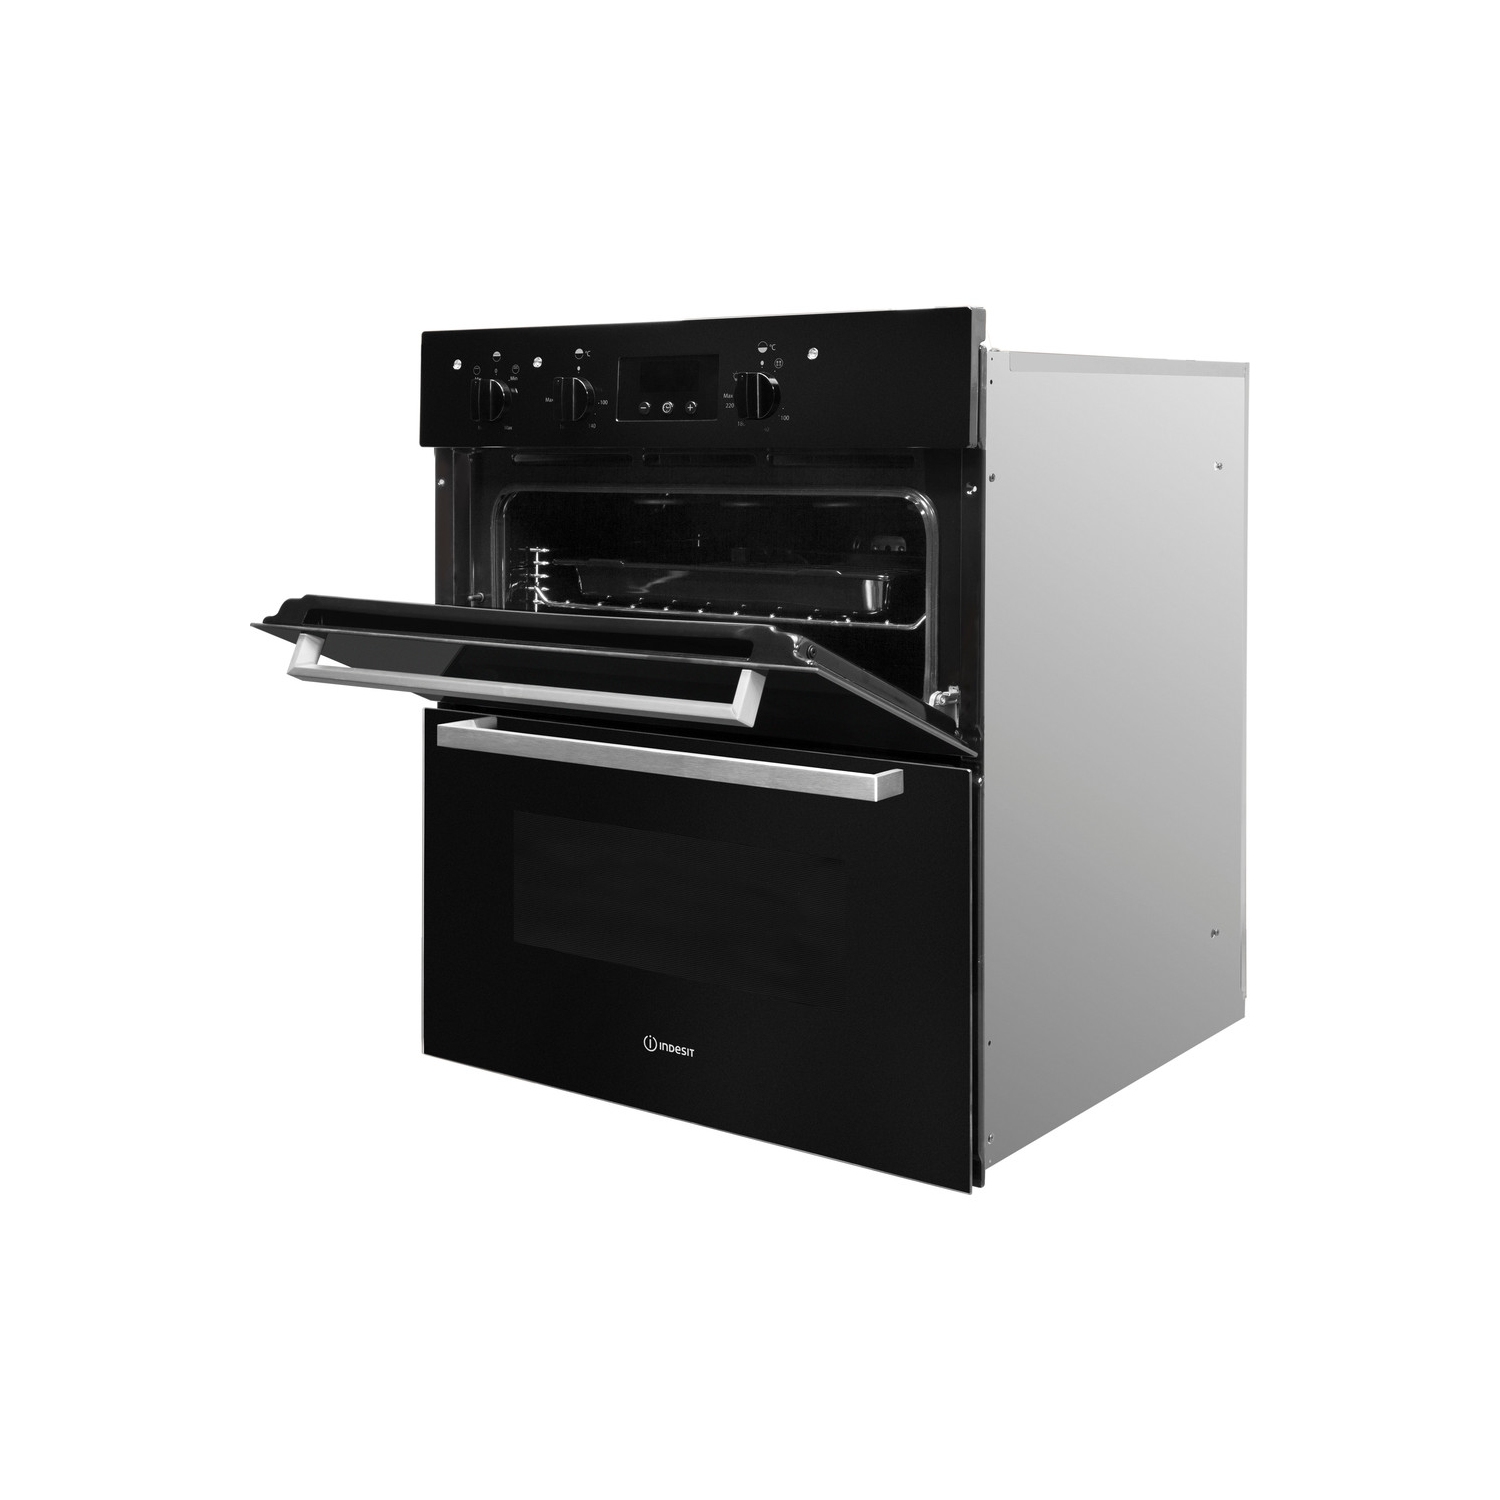 Indesit Built In Electric Double Oven - Black - B Rated - 6